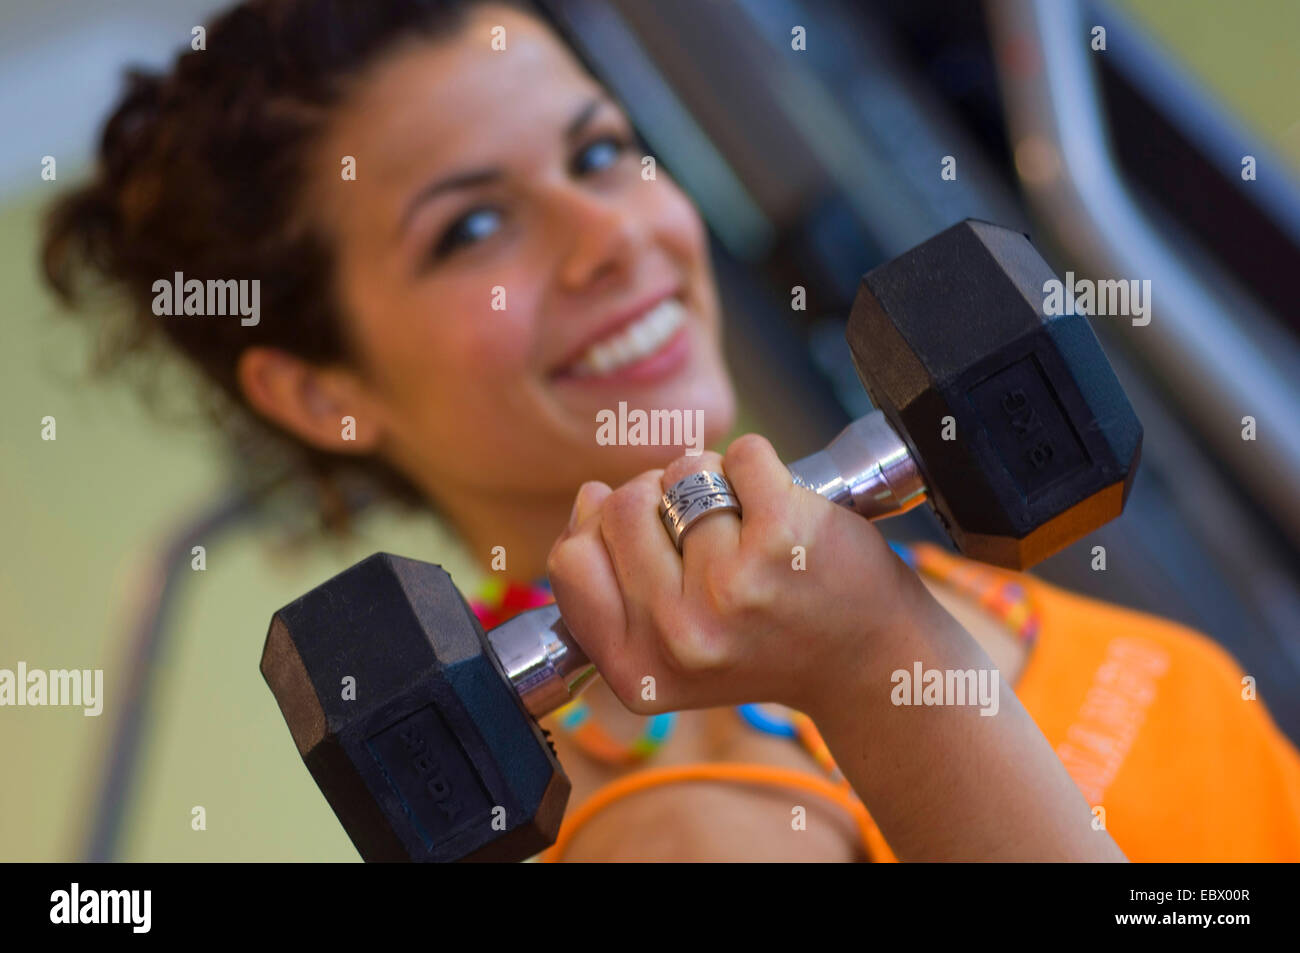 young woman in a fitness studio smiling during weight training Stock Photo